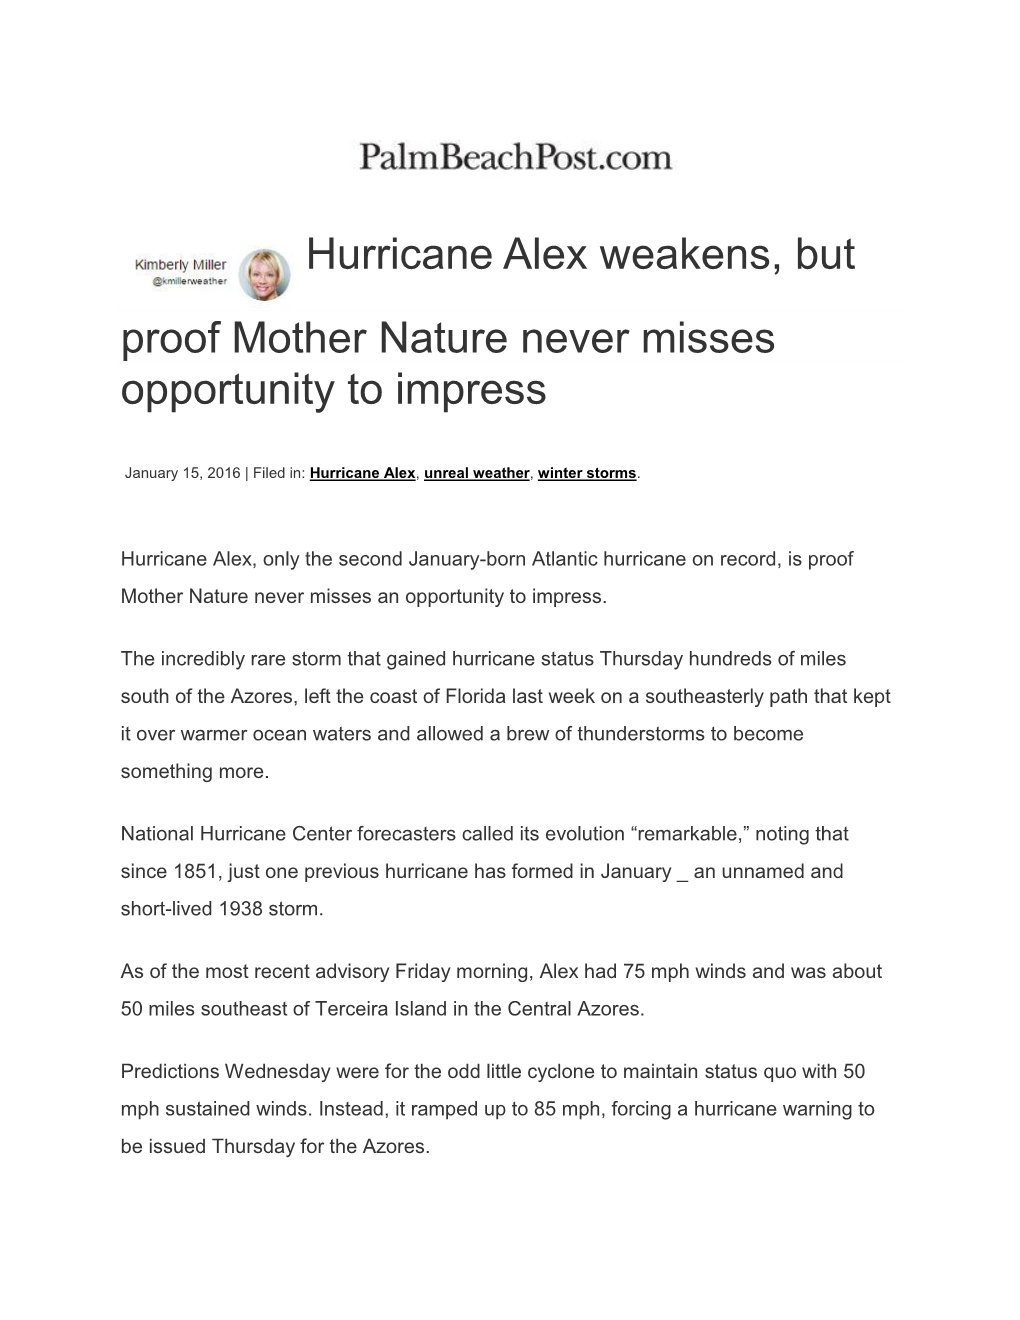 Hurricane Alex Weakens, but Proof Mother Nature Never Misses Opportunity to Impress